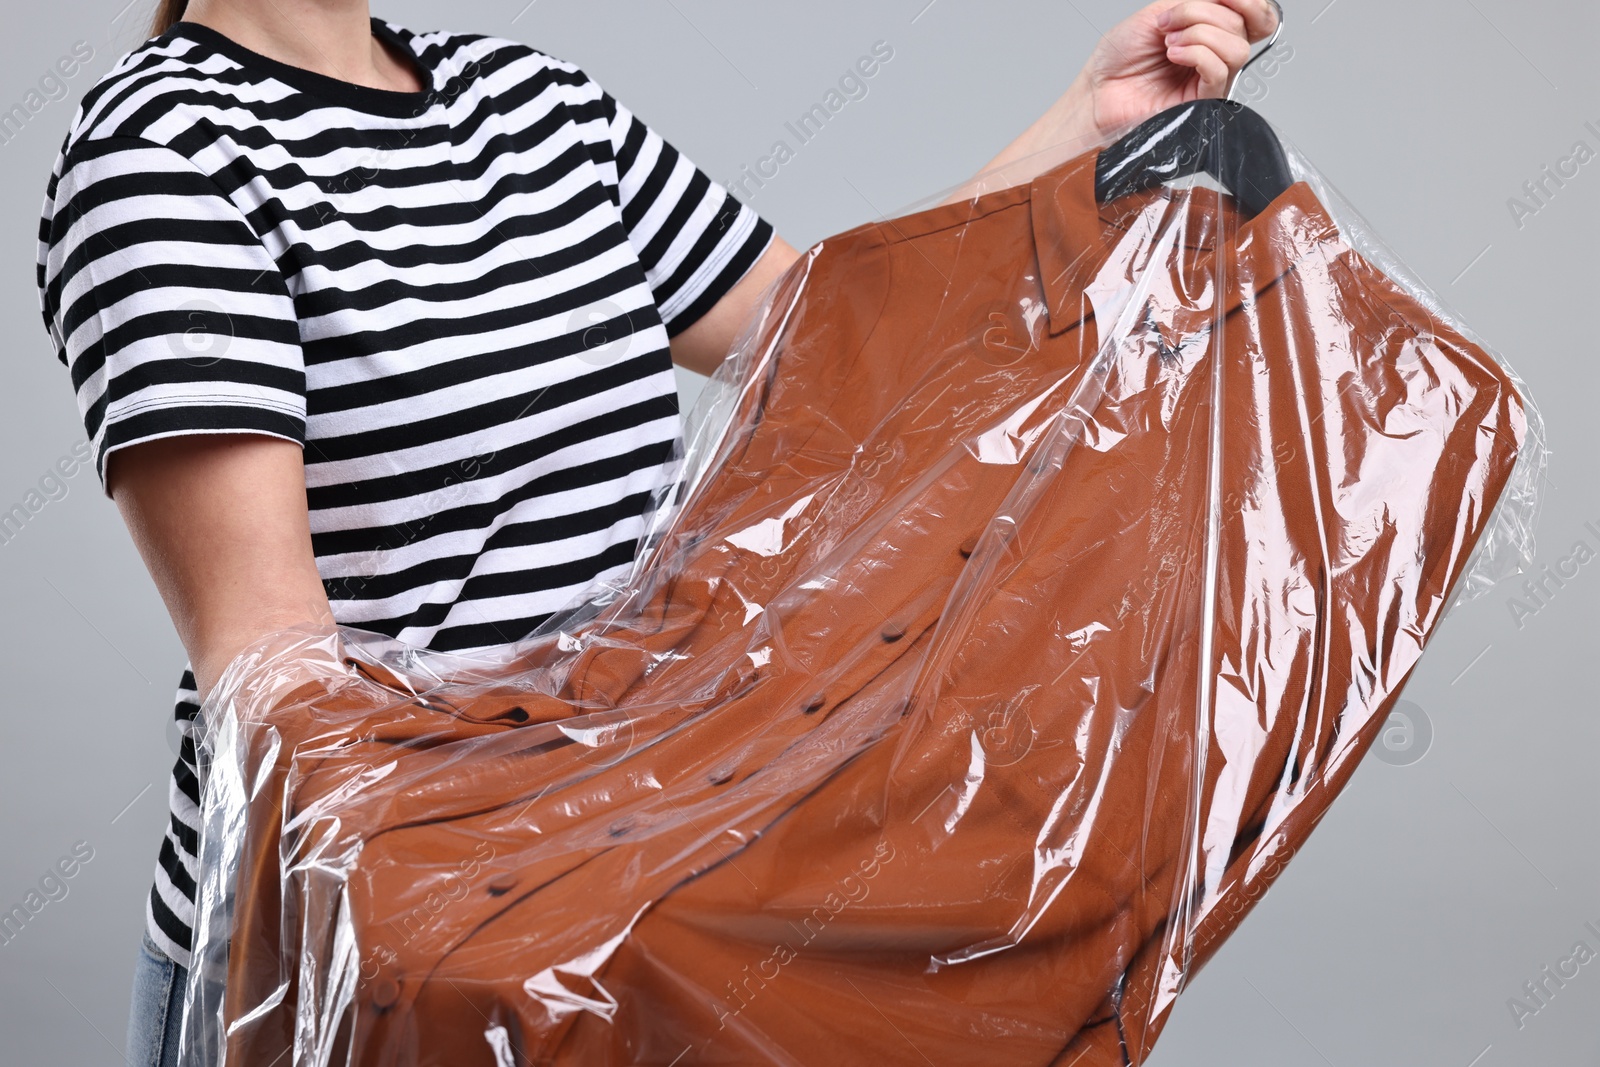 Photo of Dry-cleaning service. Woman holding shirt in plastic bag on gray background, closeup